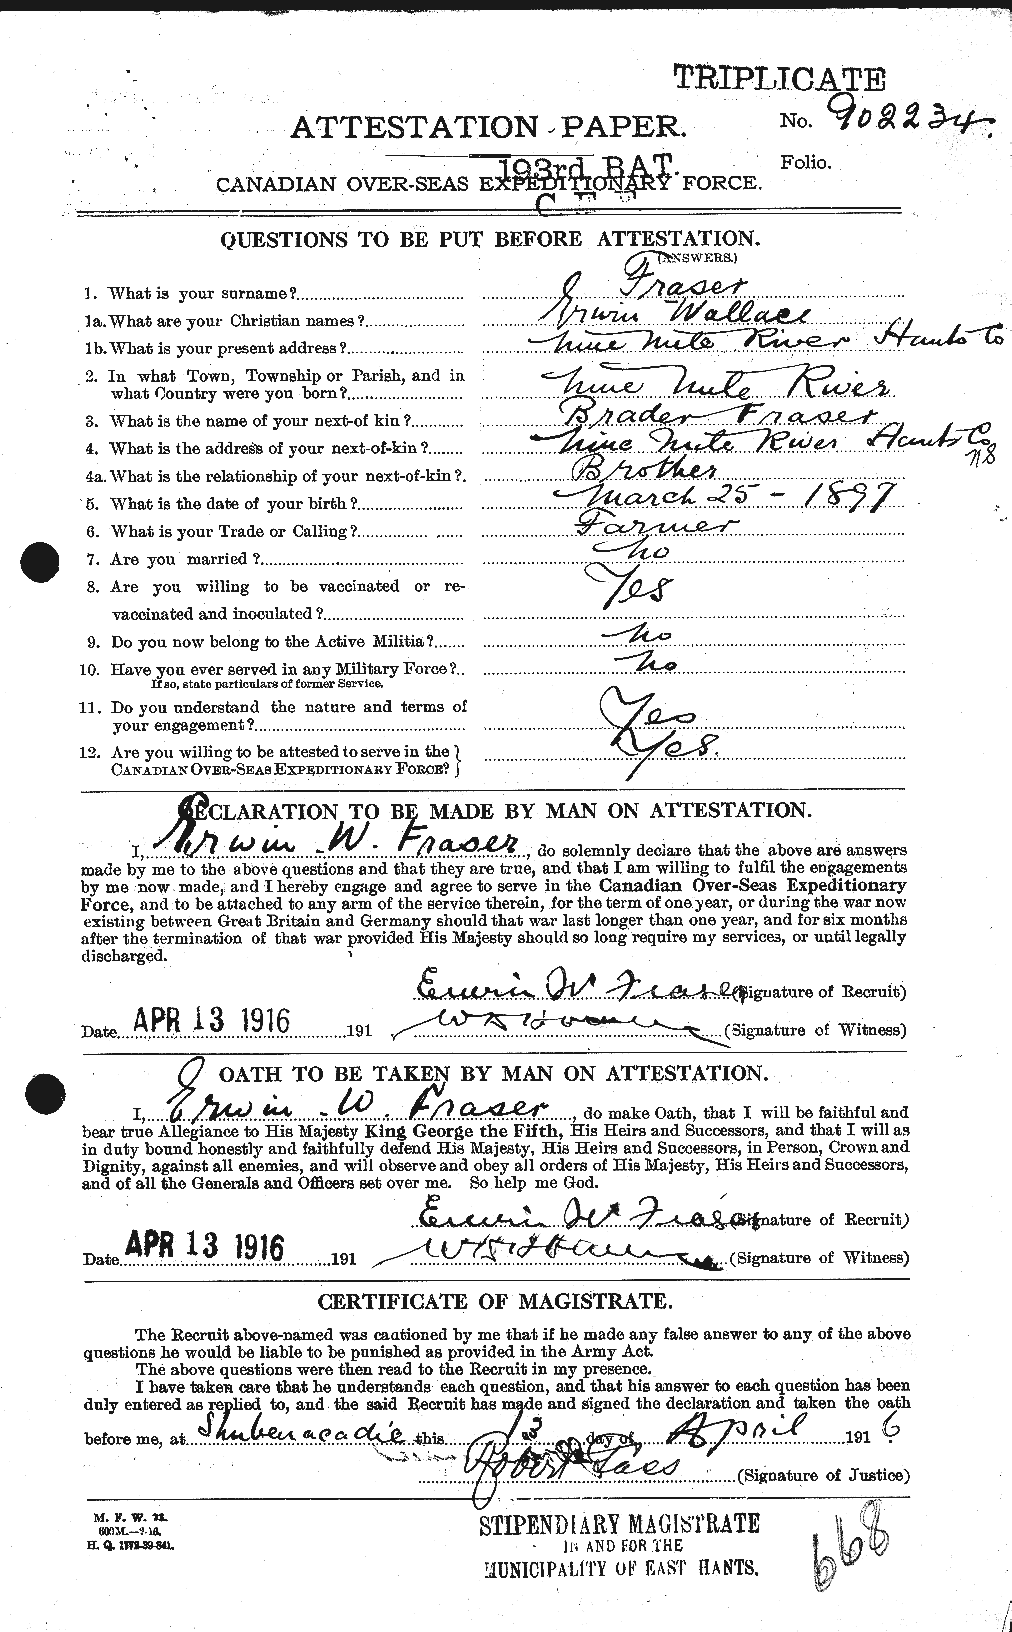 Personnel Records of the First World War - CEF 336269a